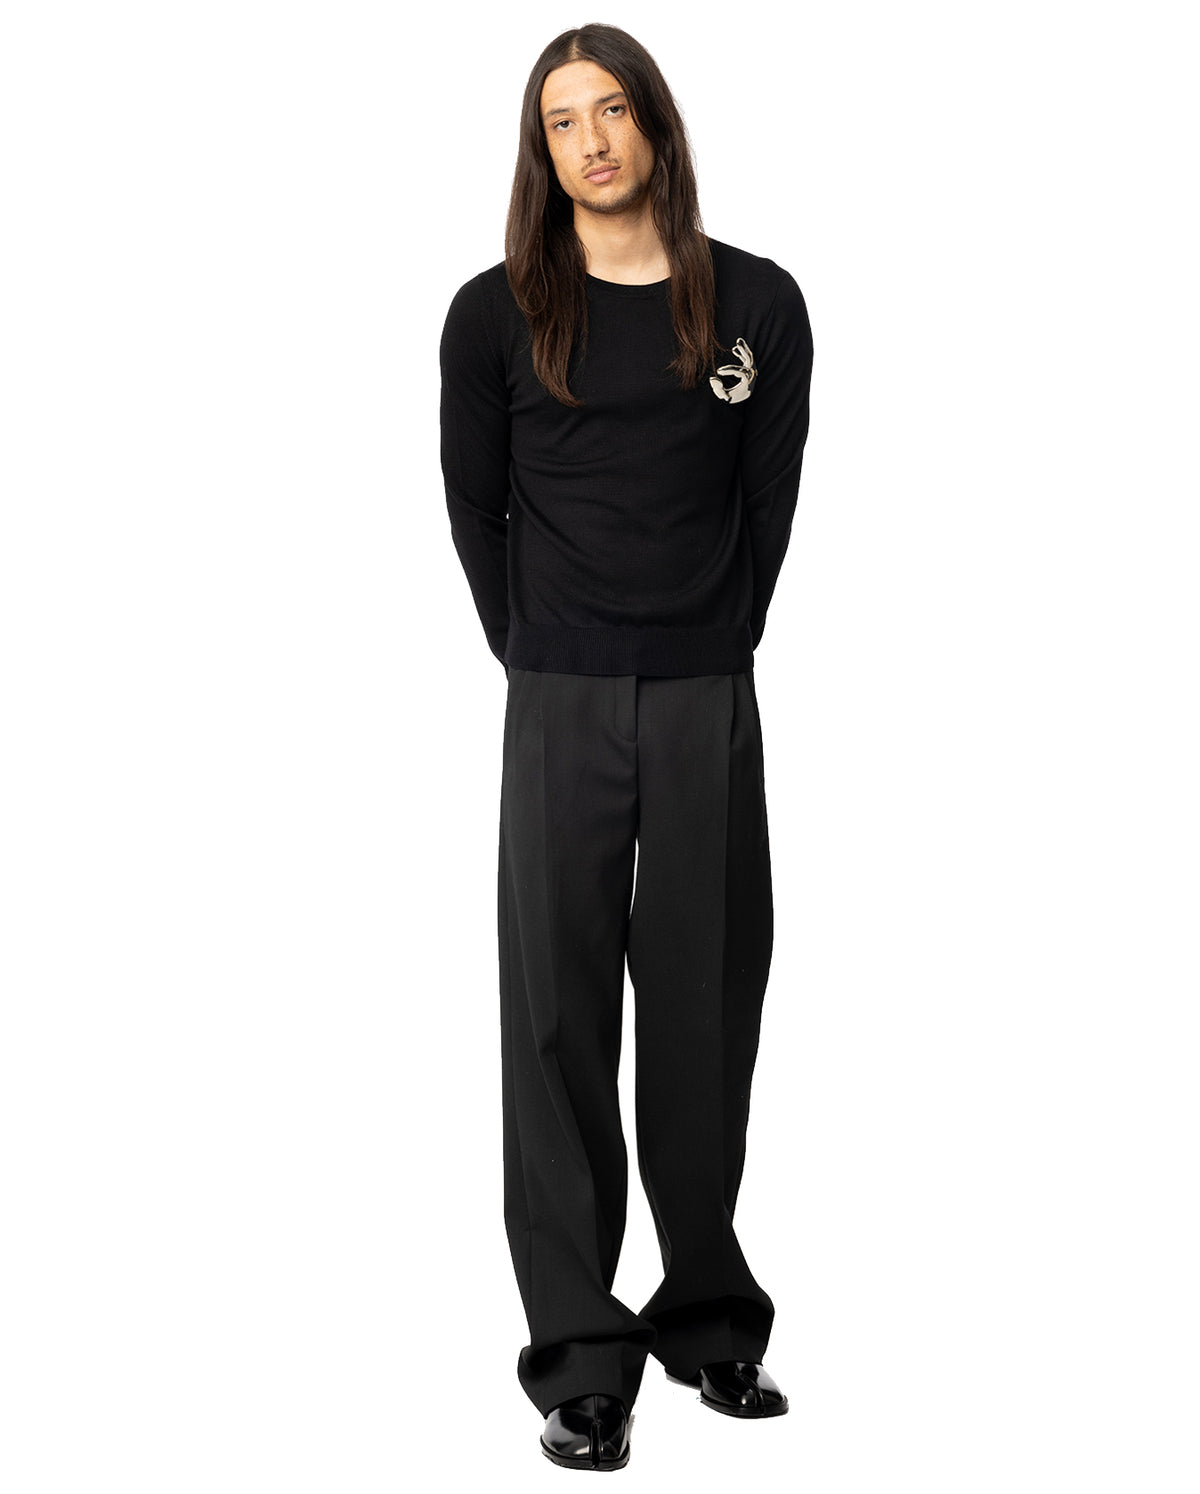 Low Rise Loose Tailored Trousers - Black